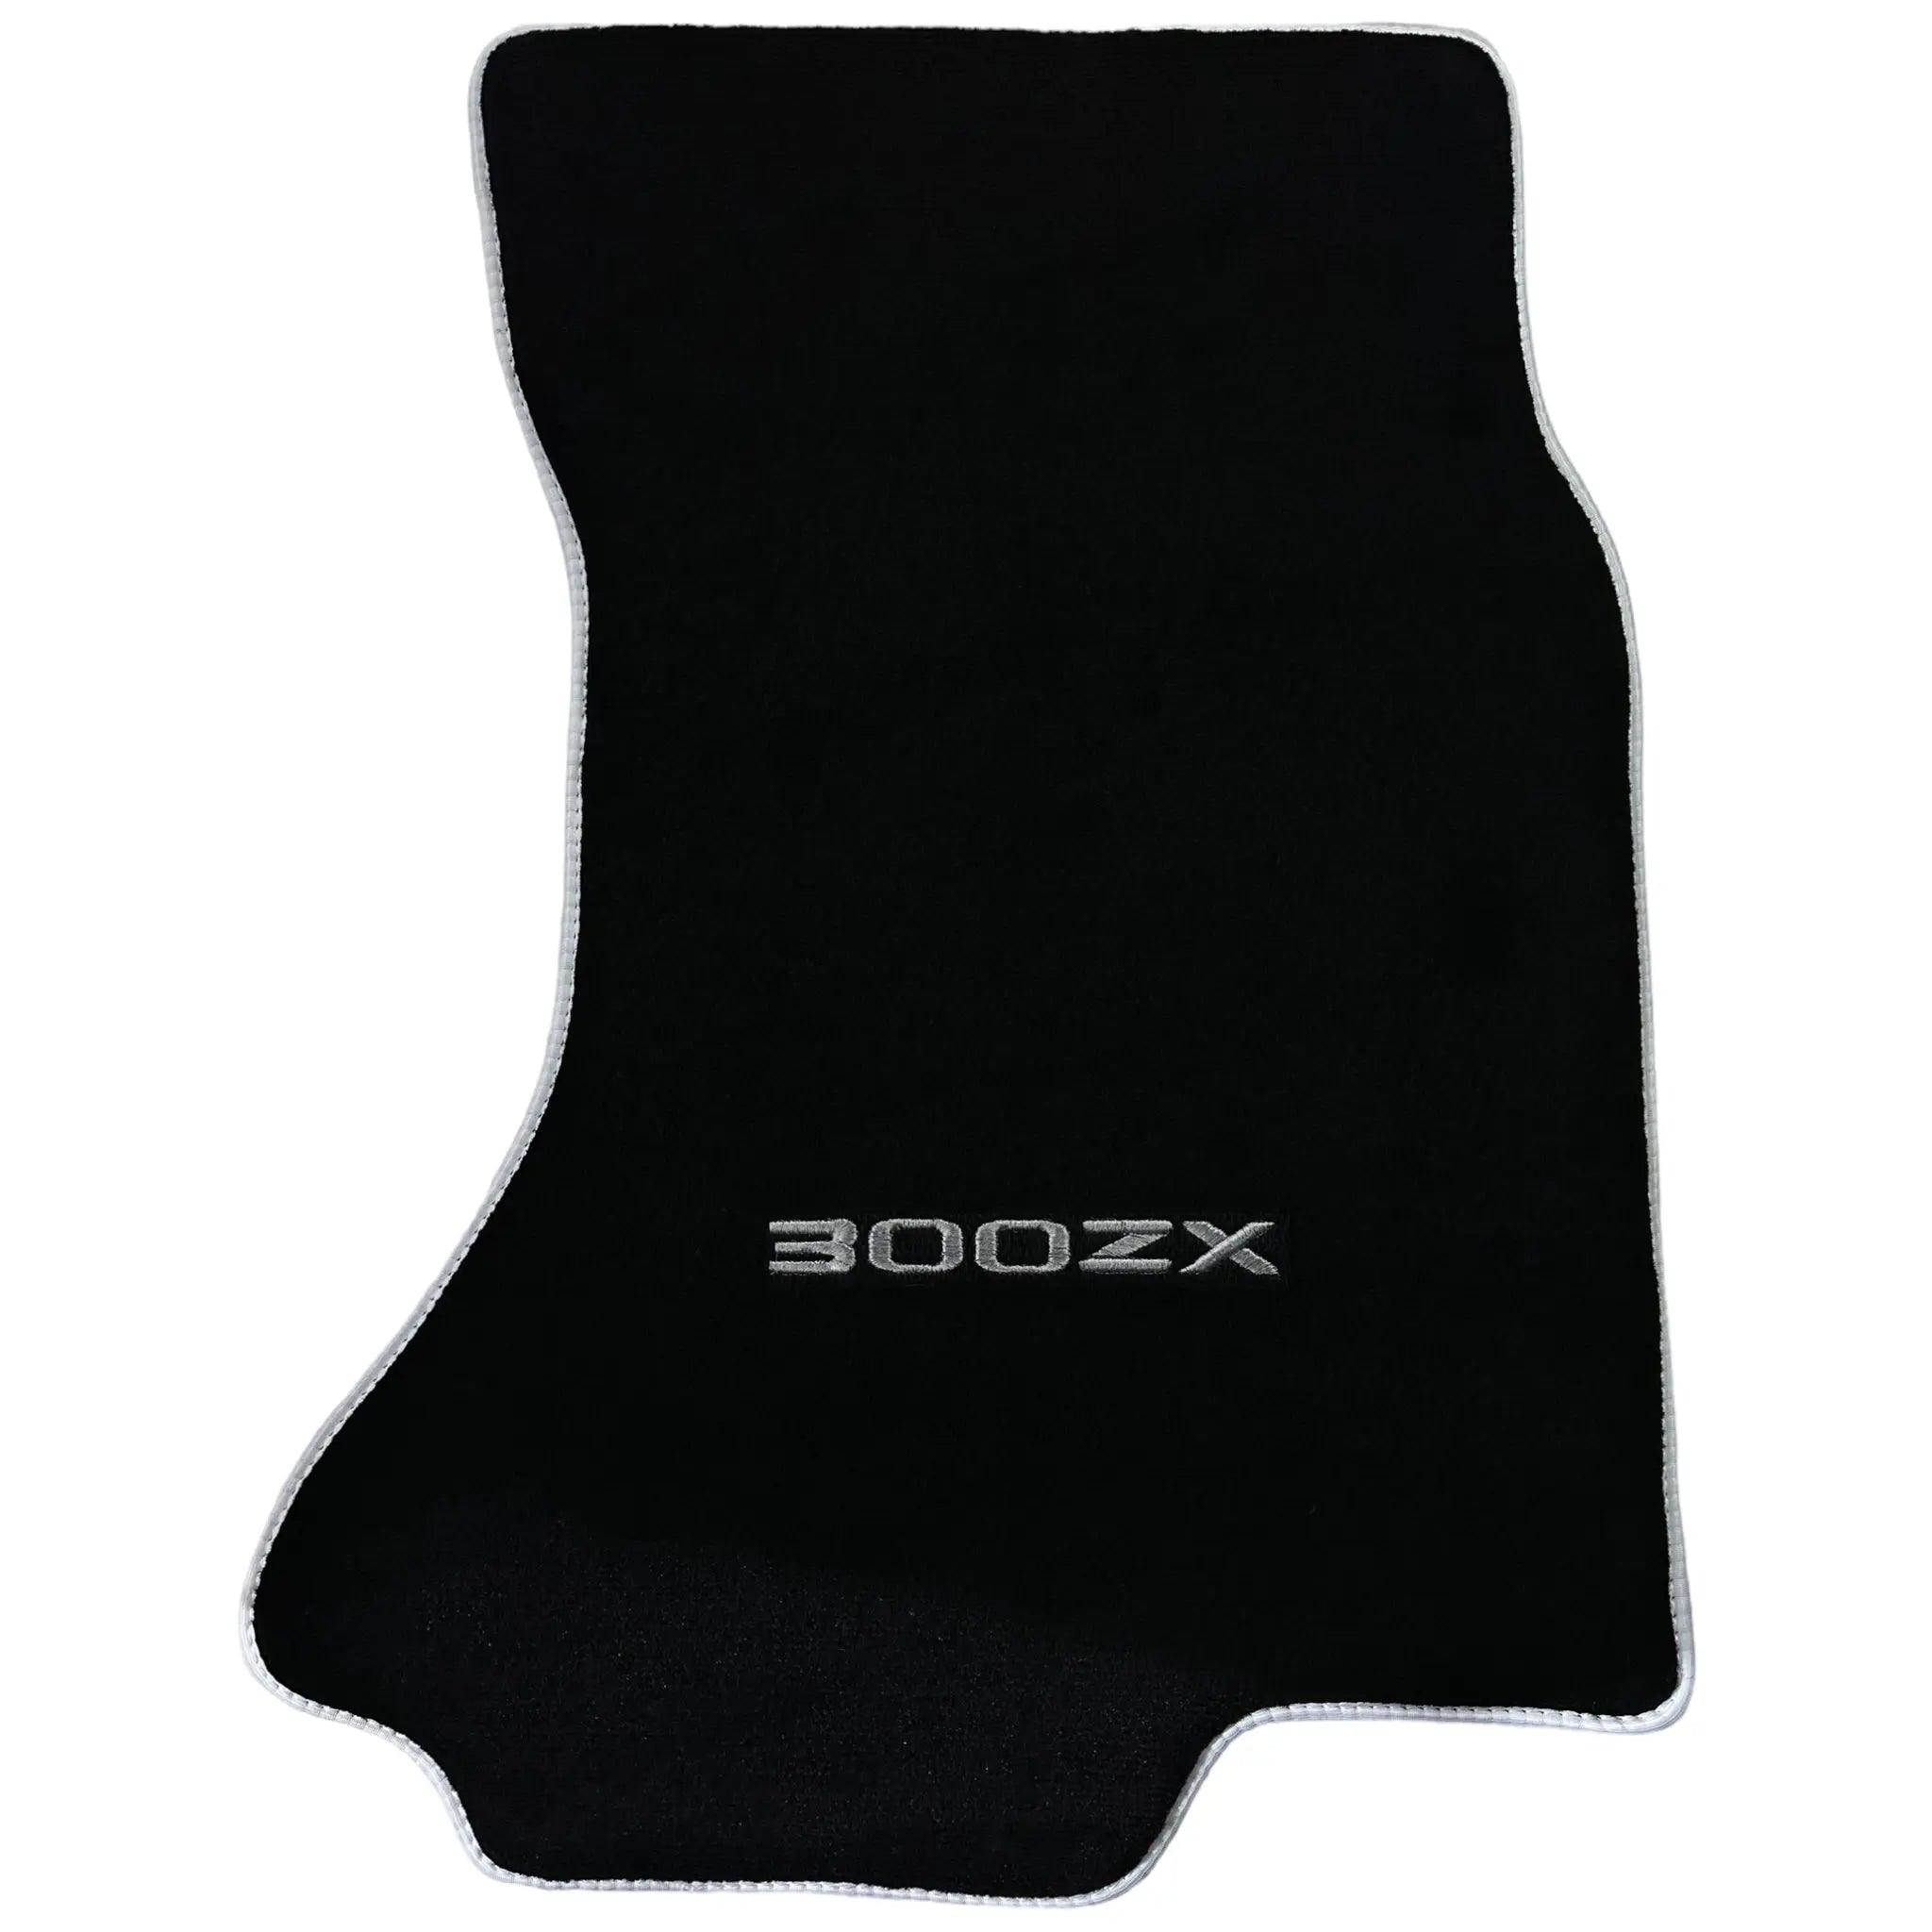 Black Floor Mats For Nissan 300ZX (1990-2000) with White Trim